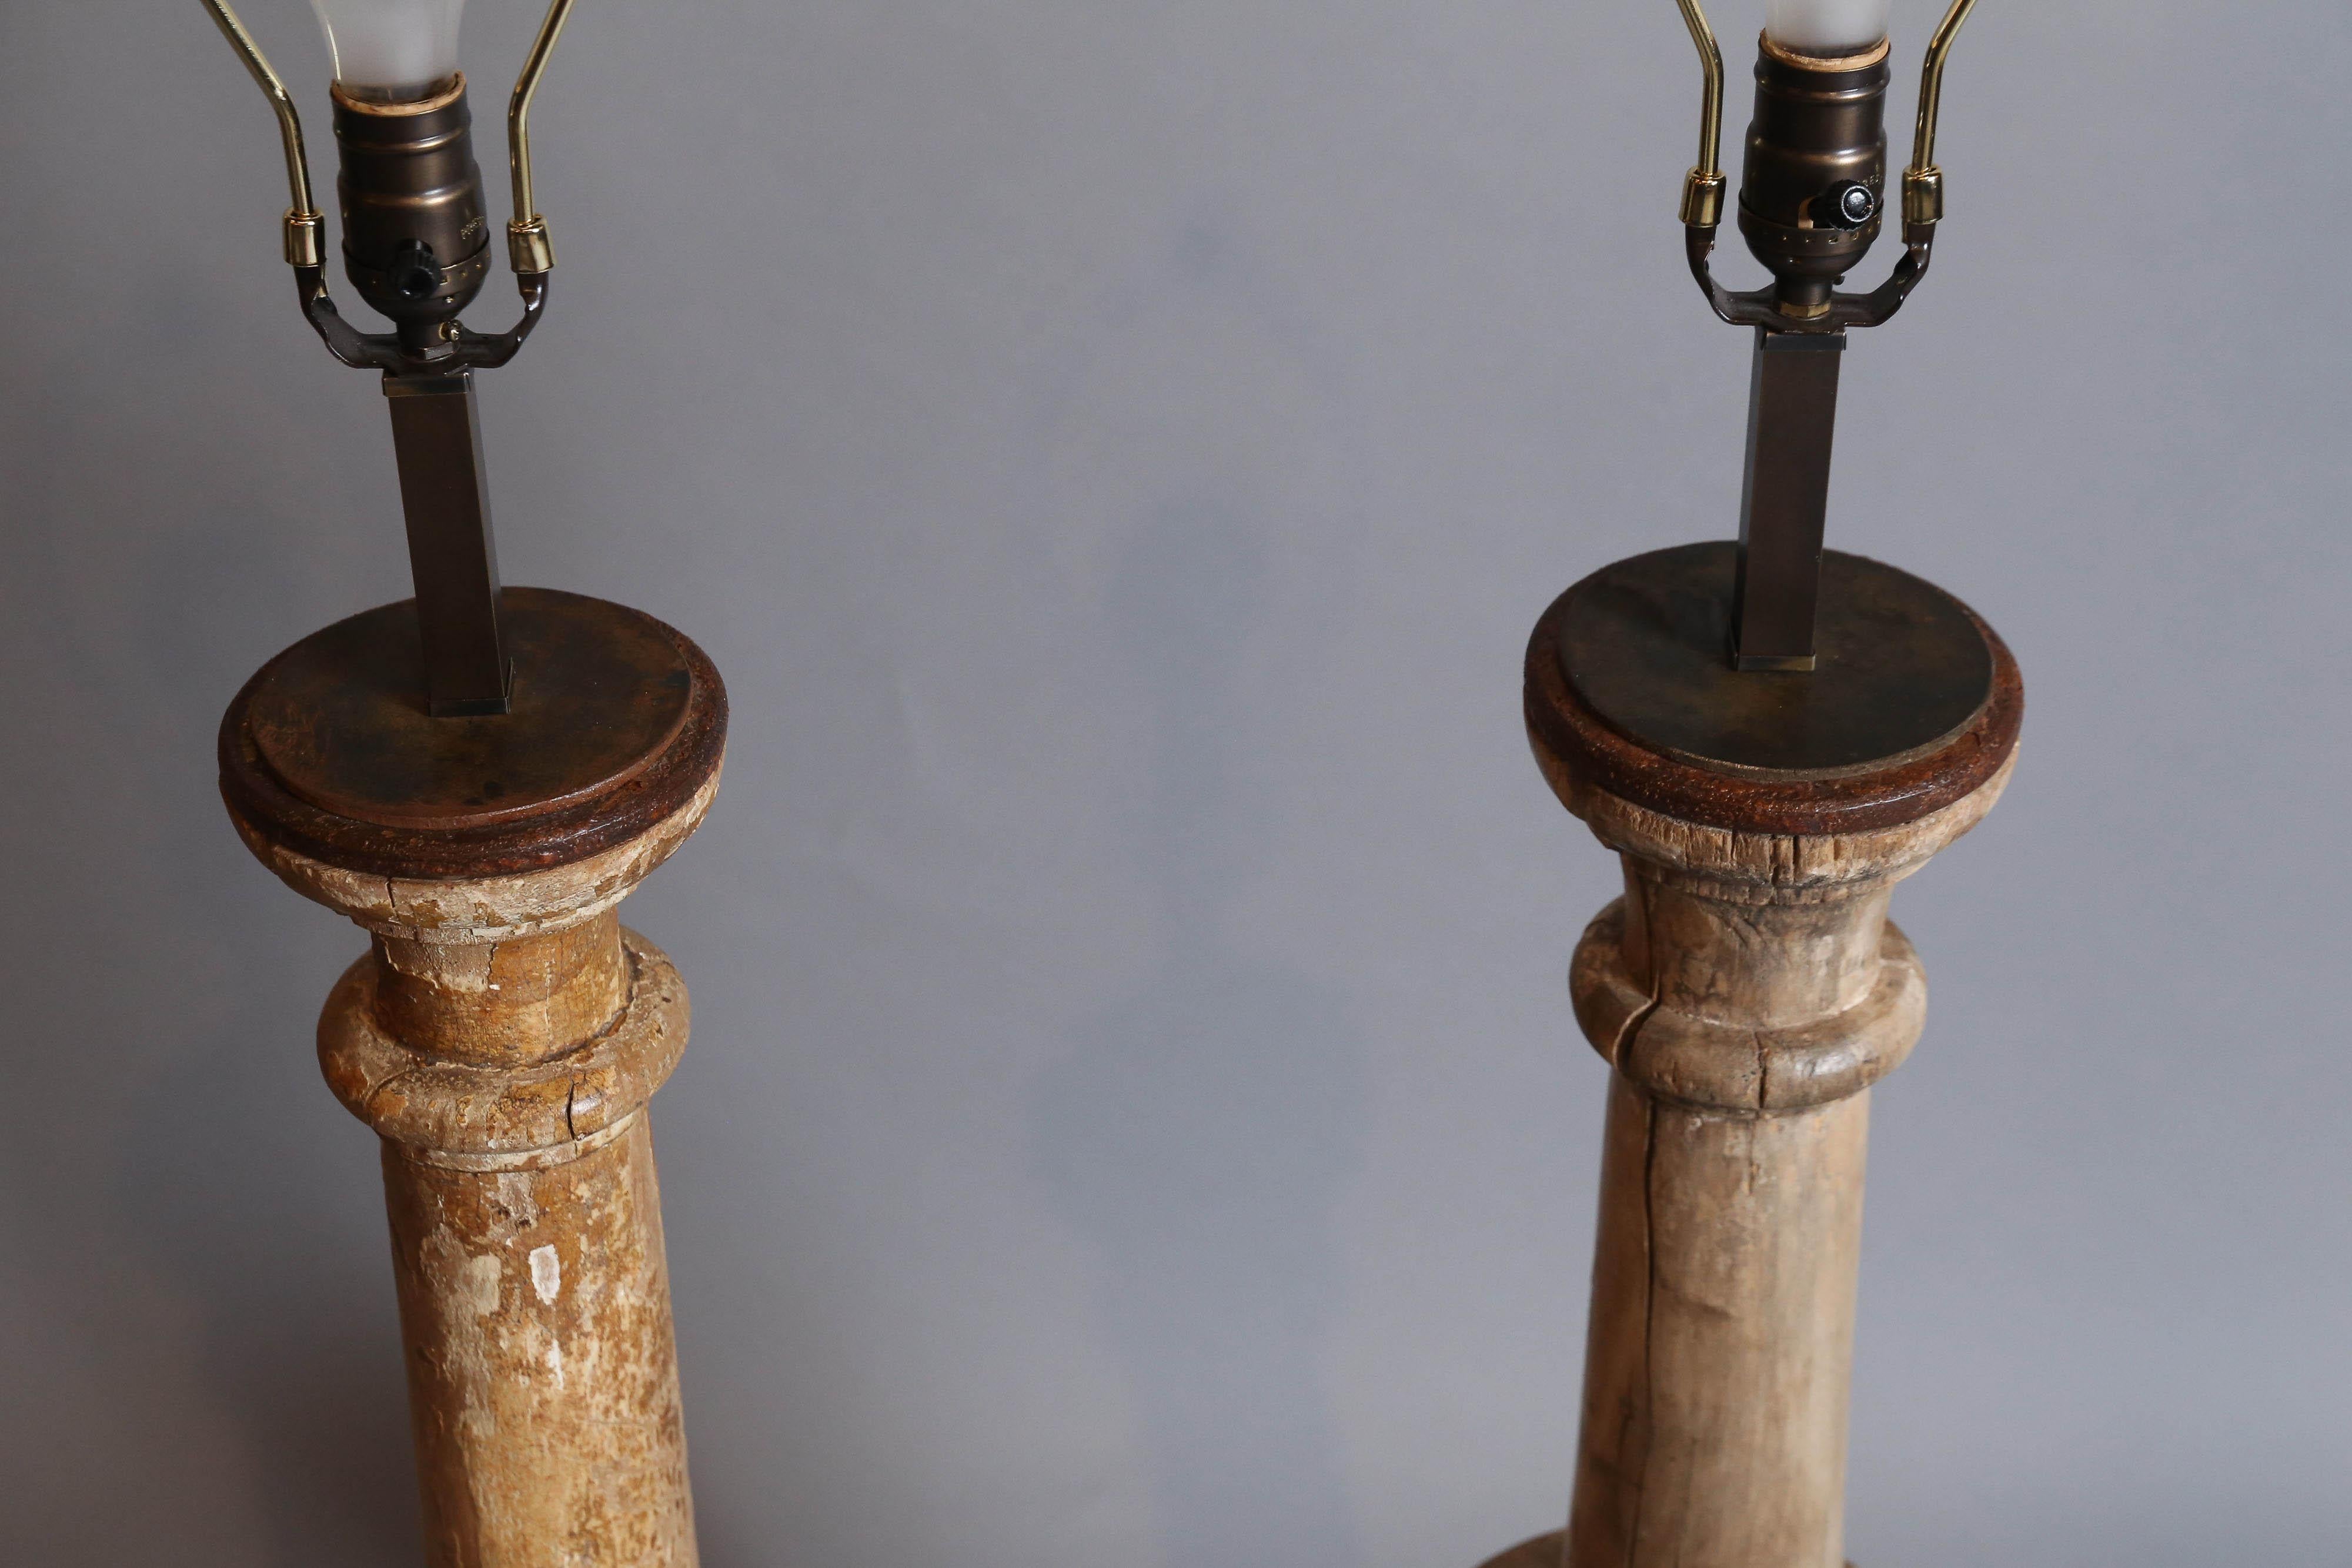 Pair of Antique Balustrades Converted to Lamps (Neoklassisch) im Angebot